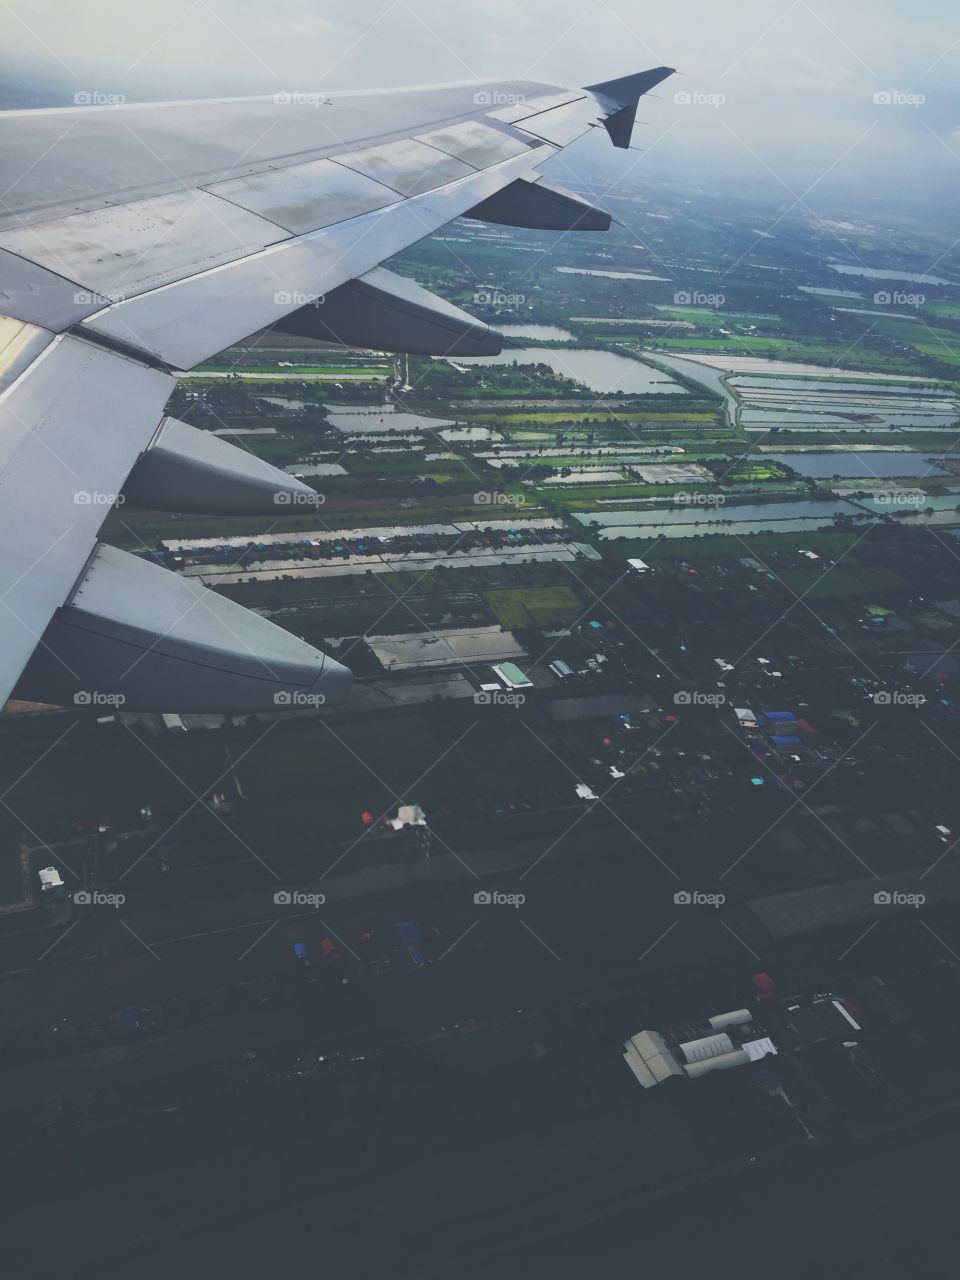 Airplane window view during takeoff in Bangkok airport, Thailand 